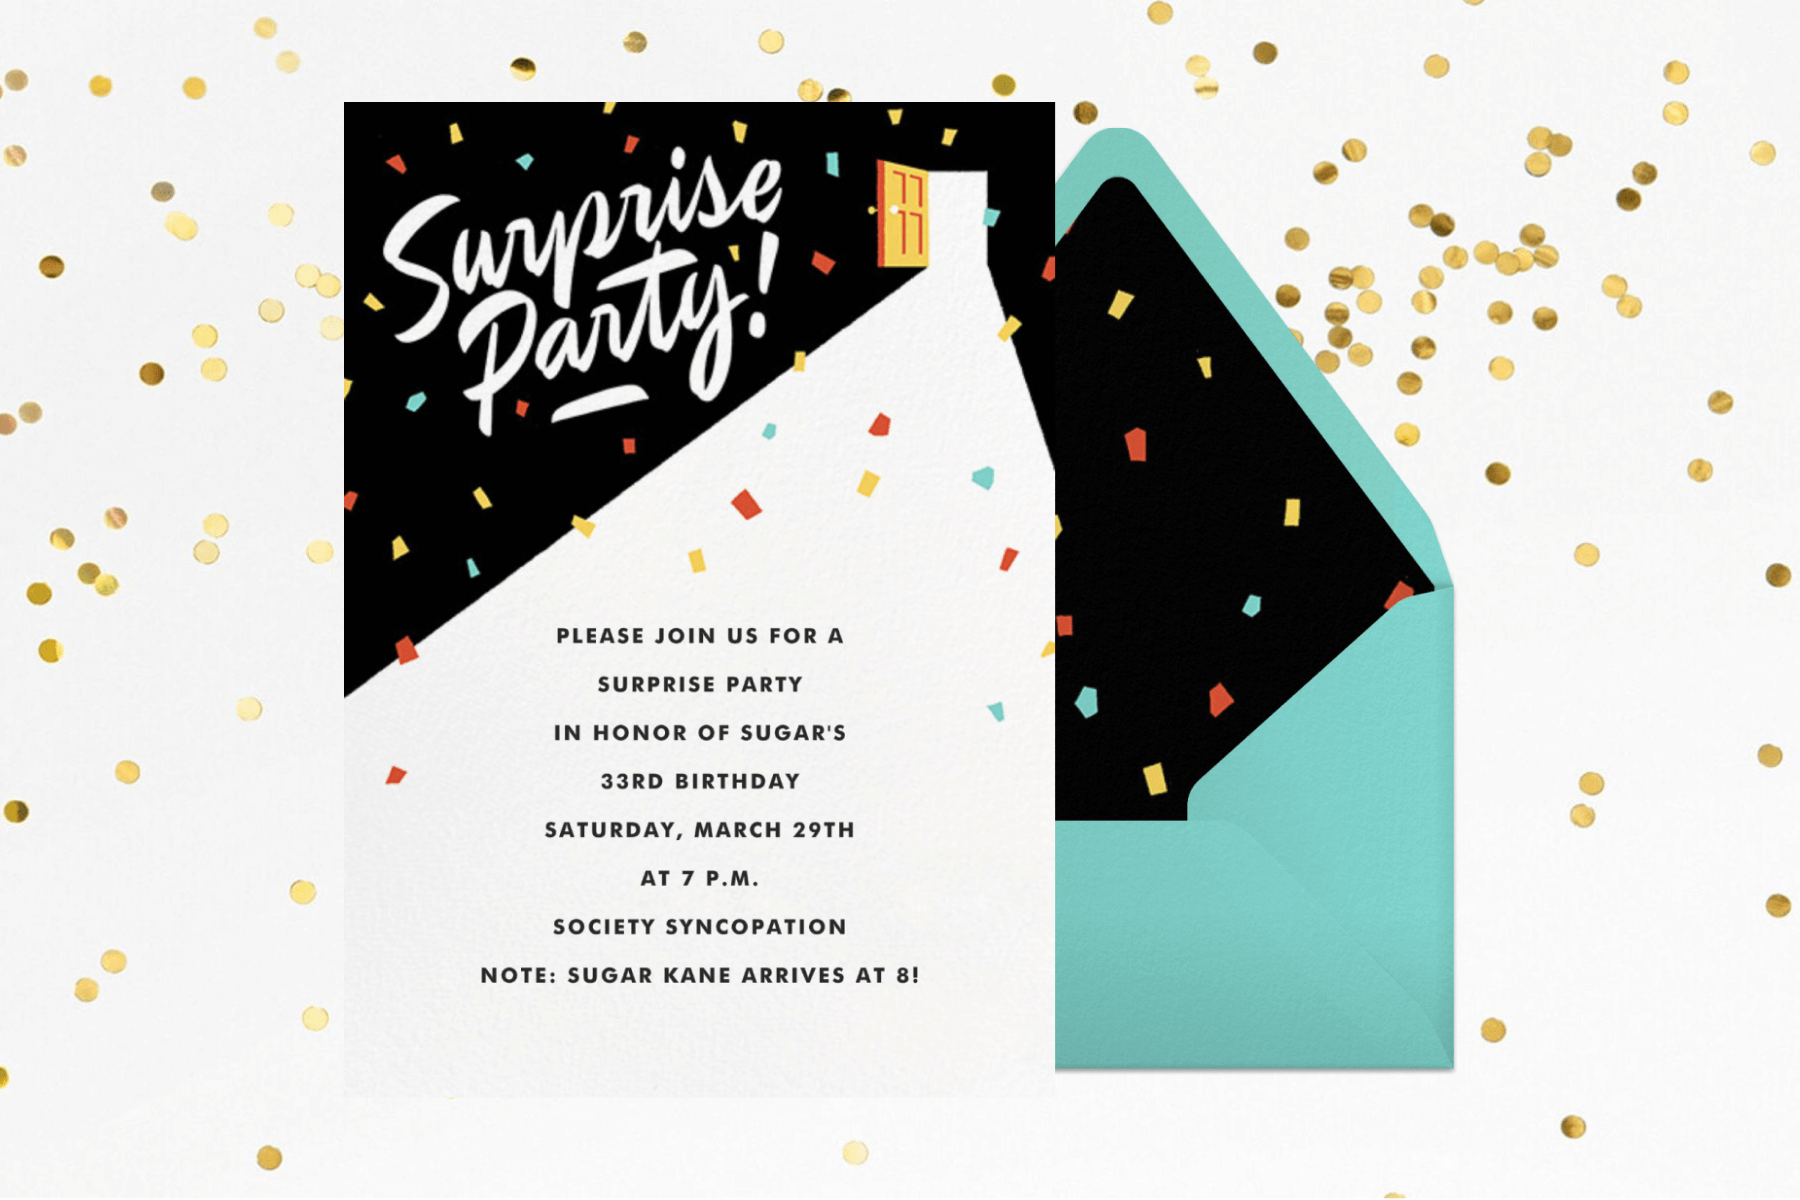 An invitation with the words SURPRISE PARTY! in white script and an illustration of a door letting light into a dark room with rainbow confetti, beside an aqua envelope with black confetti liner and gold confetti sprinkled about.